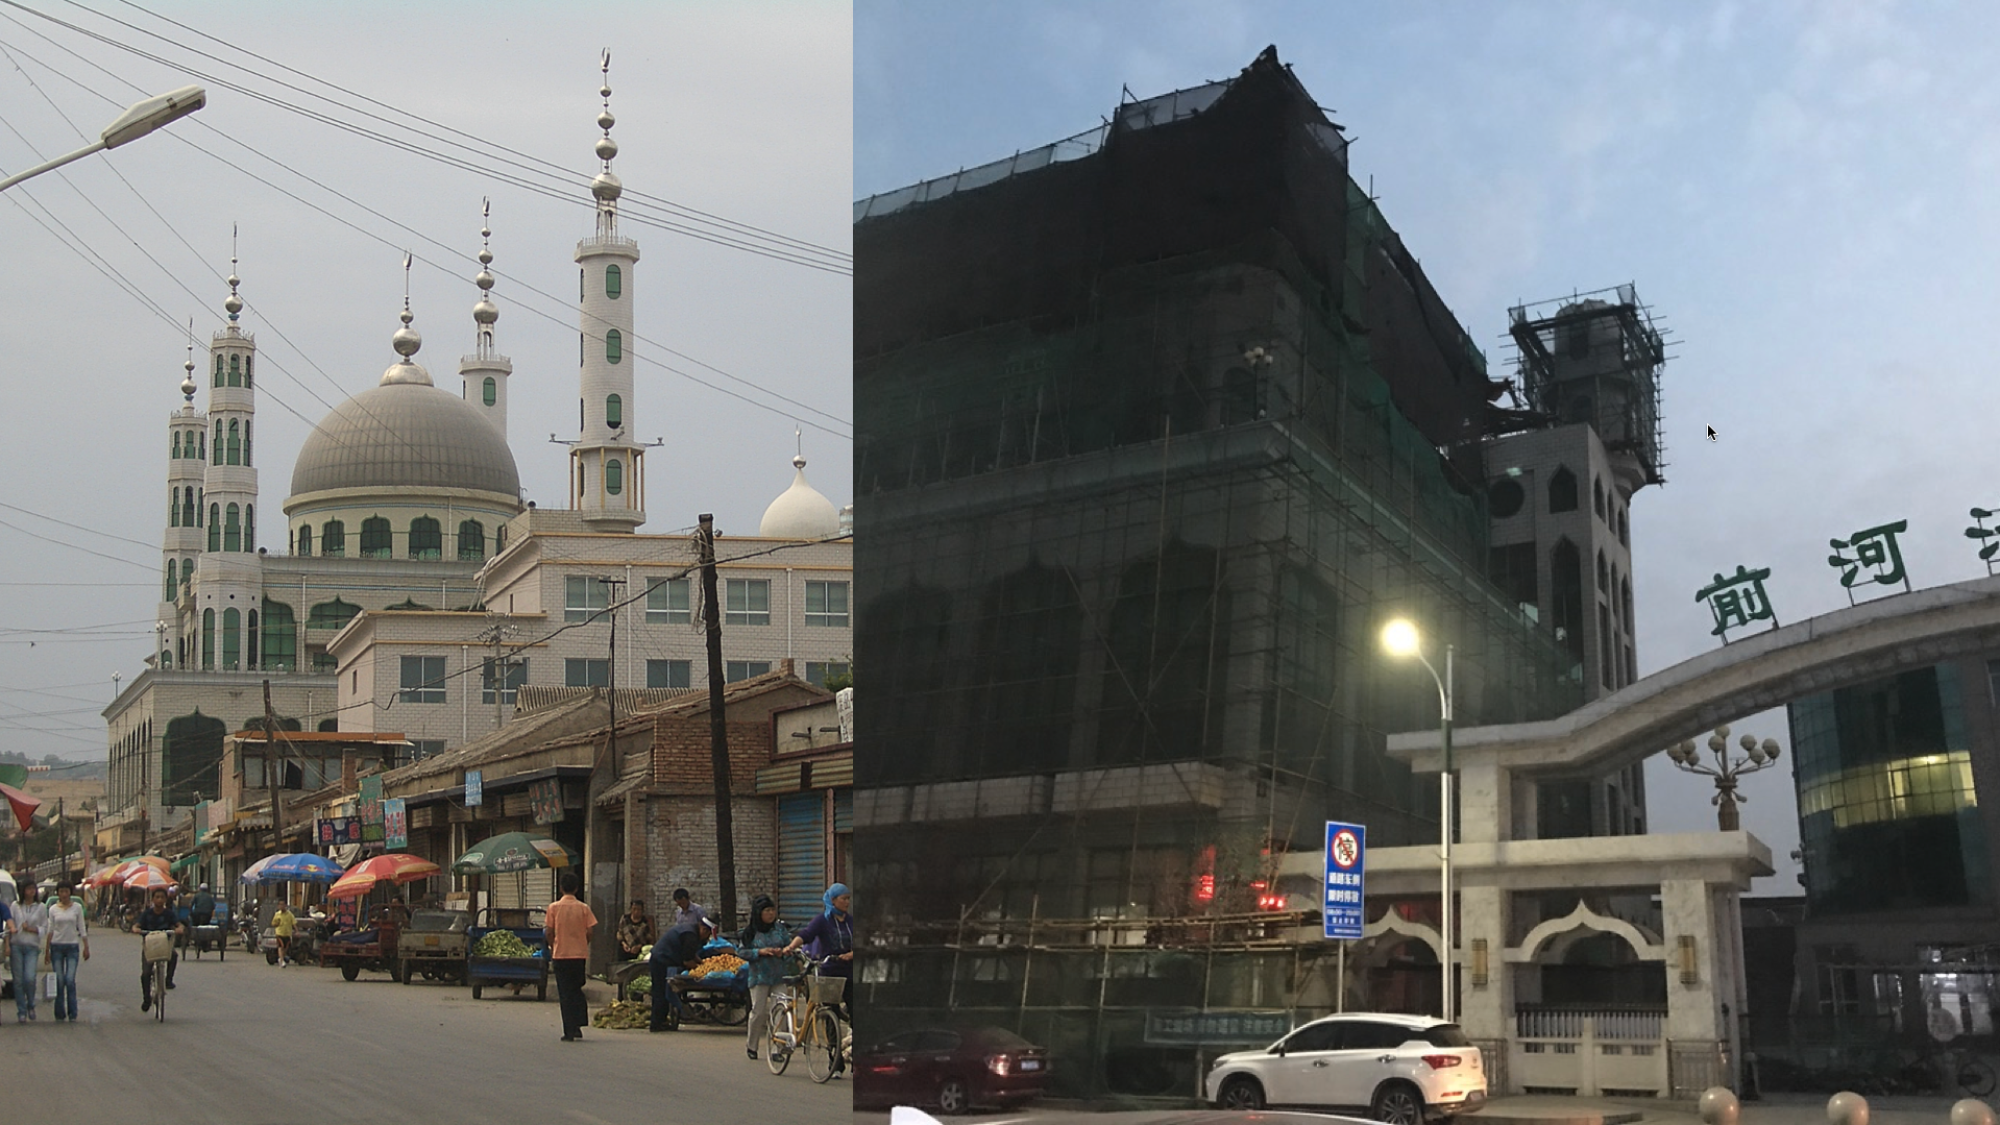 Qianheyan Mosque in Linxia, Gansu province, China, in 2009 (L) and on Nov. 13, 2020 (R).